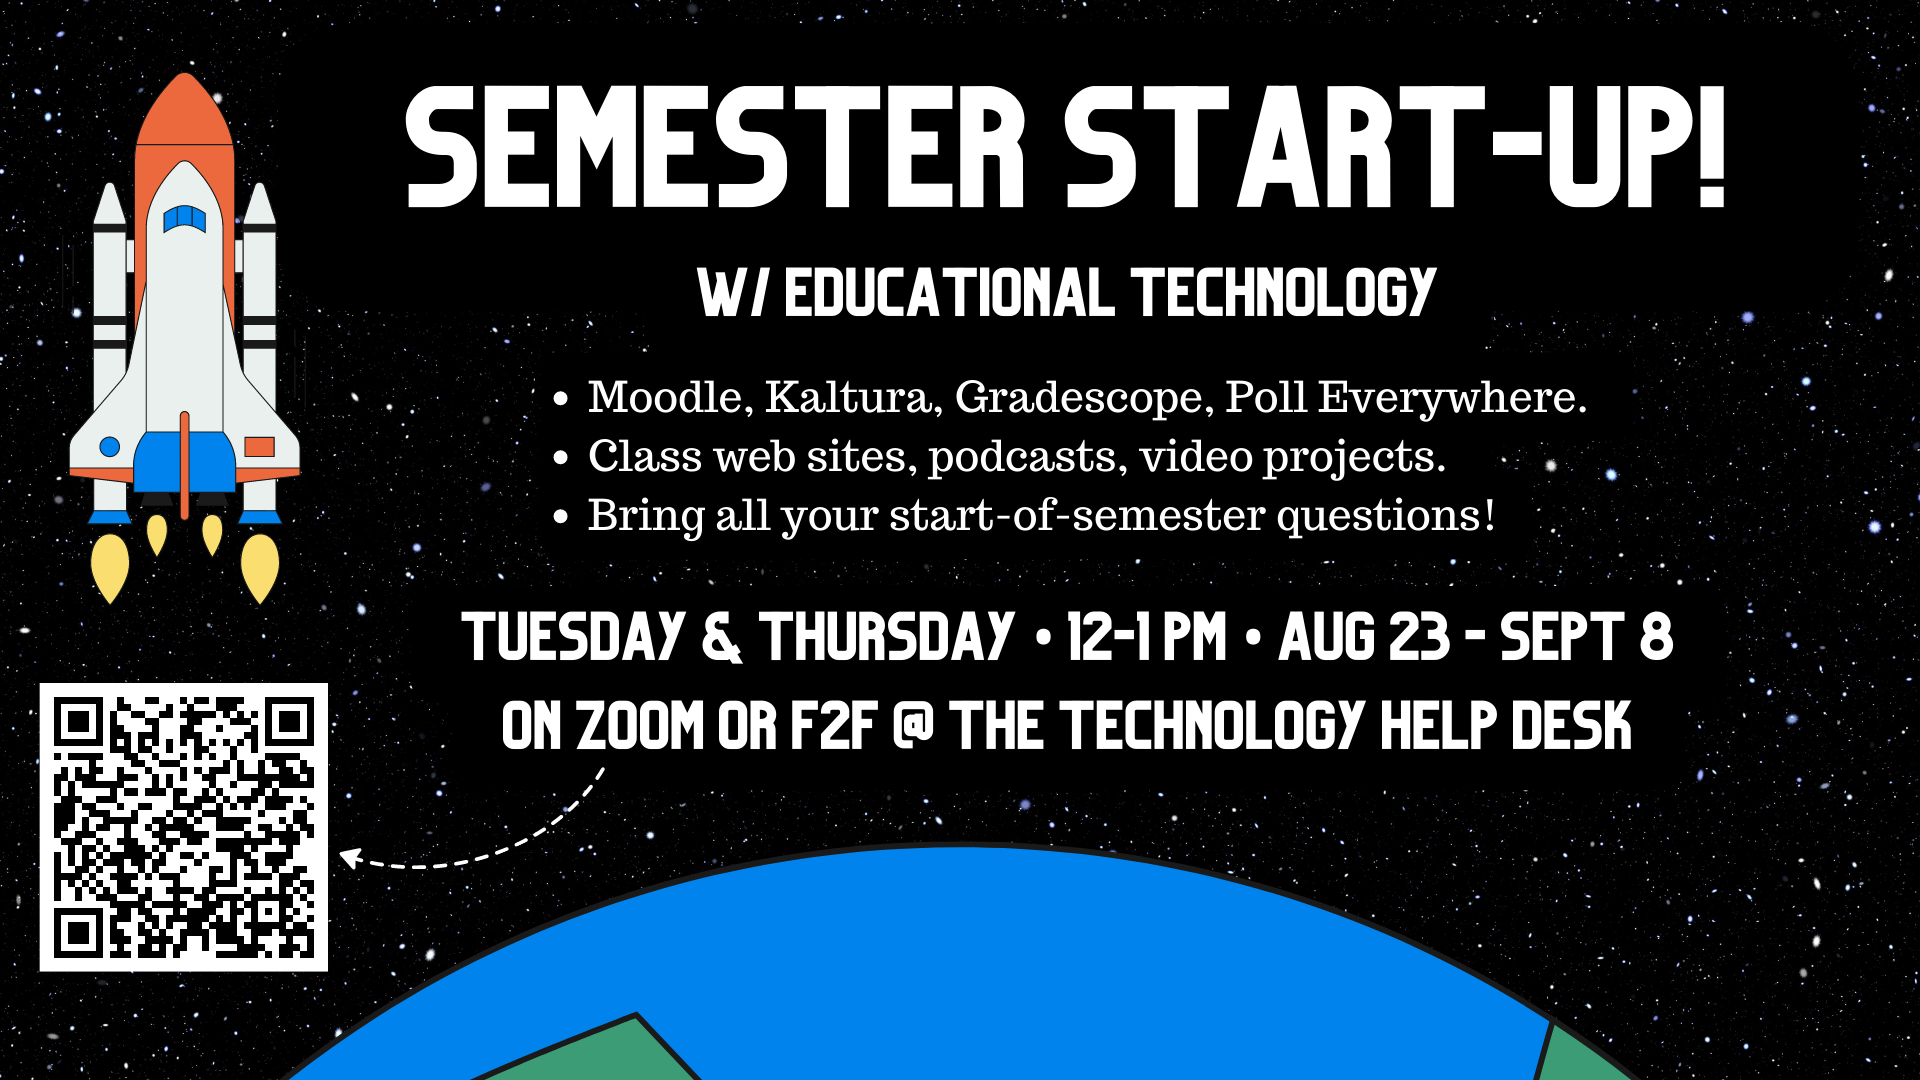 Semester startup information, e-mail edtech@mtholyoke.edu if you have follow up questions.